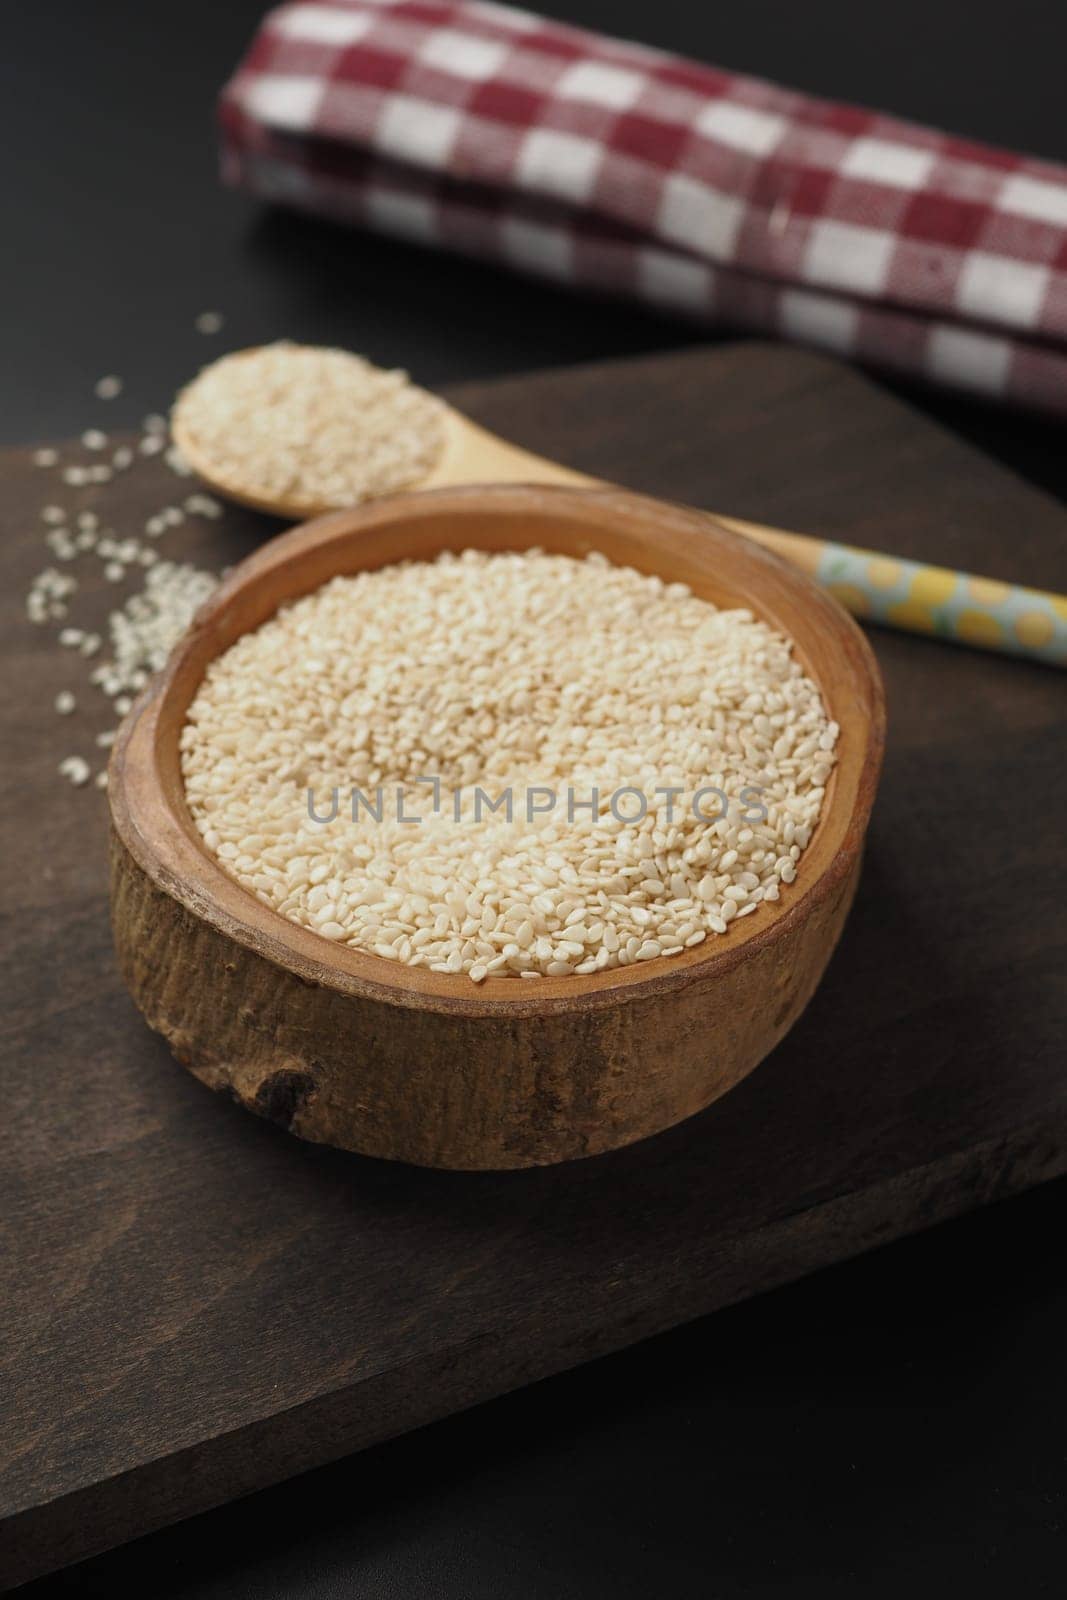 Close-up of white sesame seeds in a rustic wooden bowl and spoon, with a red plaid cloth in the background.